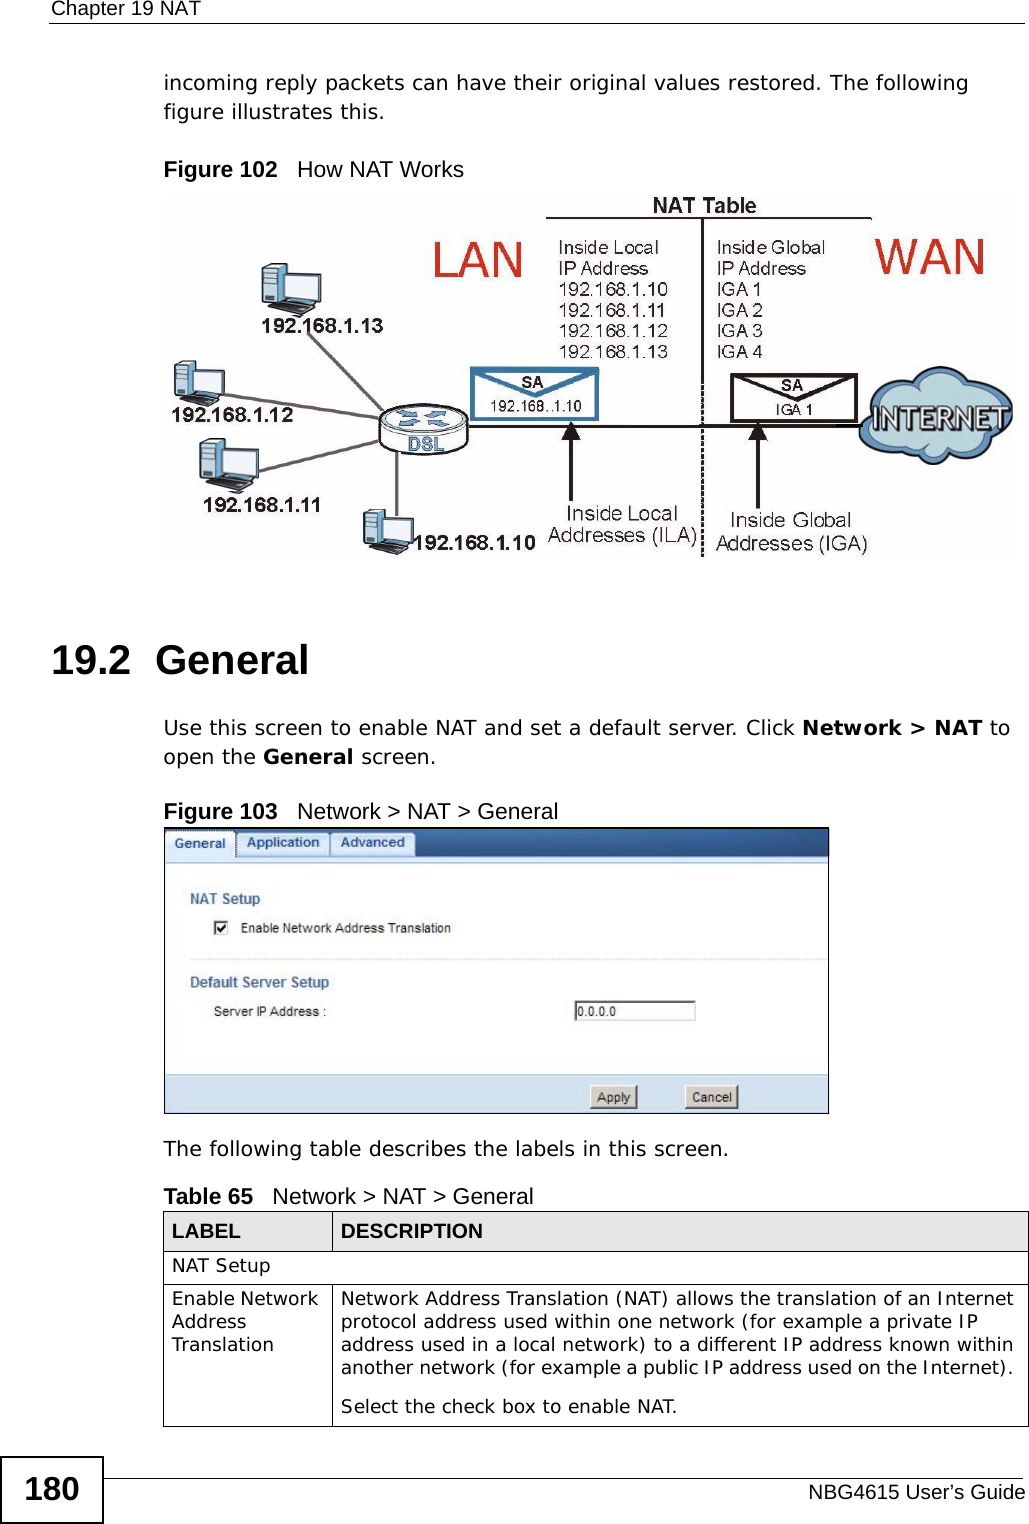 Chapter 19 NATNBG4615 User’s Guide180incoming reply packets can have their original values restored. The following figure illustrates this.Figure 102   How NAT Works19.2  GeneralUse this screen to enable NAT and set a default server. Click Network &gt; NAT to open the General screen.Figure 103   Network &gt; NAT &gt; General The following table describes the labels in this screen.Table 65   Network &gt; NAT &gt; GeneralLABEL DESCRIPTIONNAT SetupEnable Network Address TranslationNetwork Address Translation (NAT) allows the translation of an Internet protocol address used within one network (for example a private IP address used in a local network) to a different IP address known within another network (for example a public IP address used on the Internet). Select the check box to enable NAT.